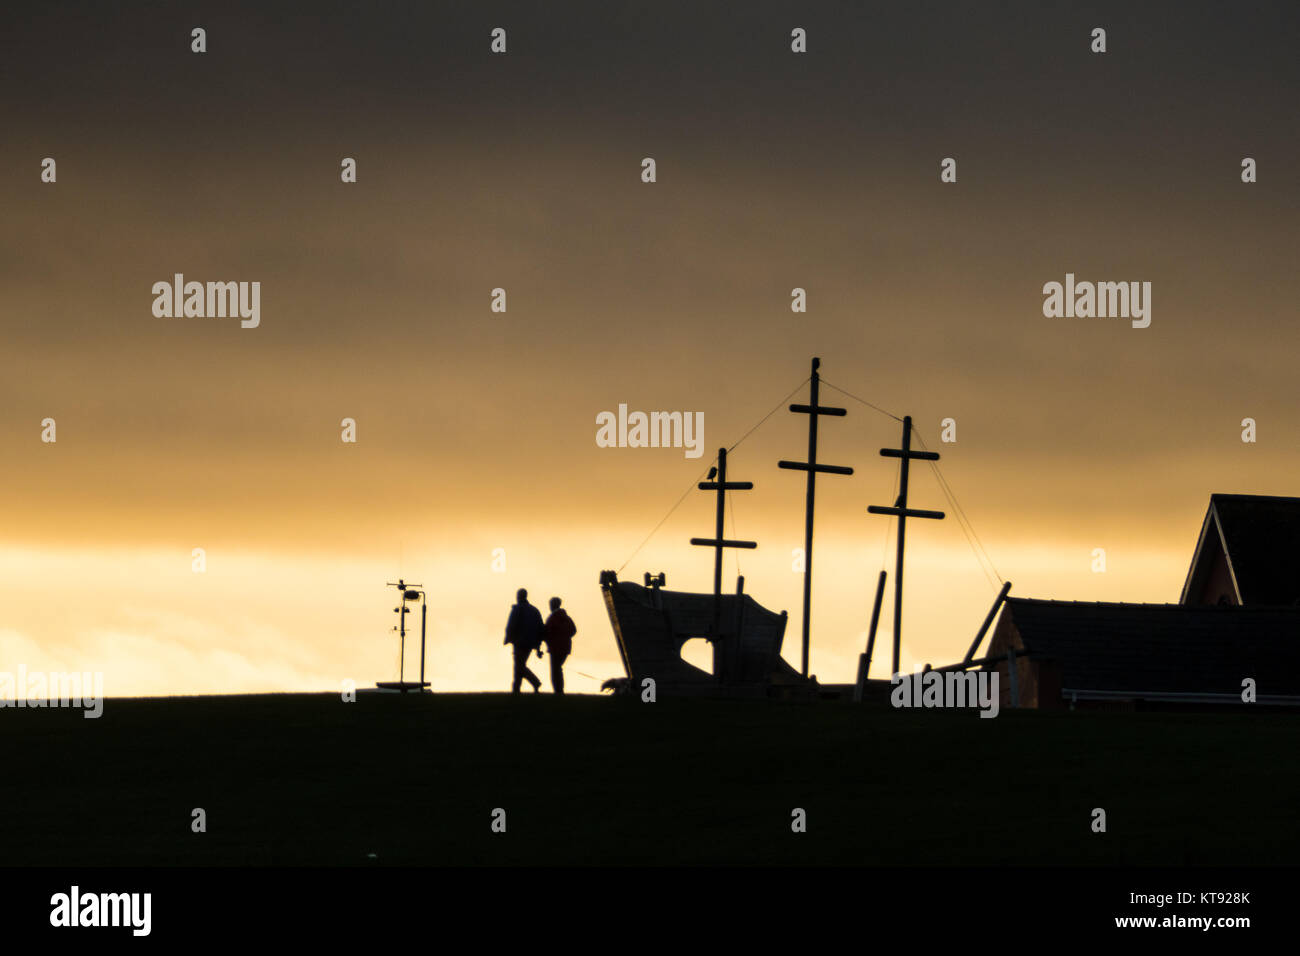 Ballywalter, Co Down, N Ireland, UK. 23rd Dec, 2017. Weather news. A mild and bright morning in Ballywalter, Northern Ireland. copyright Credit: gary telford/Alamy Live News Stock Photo